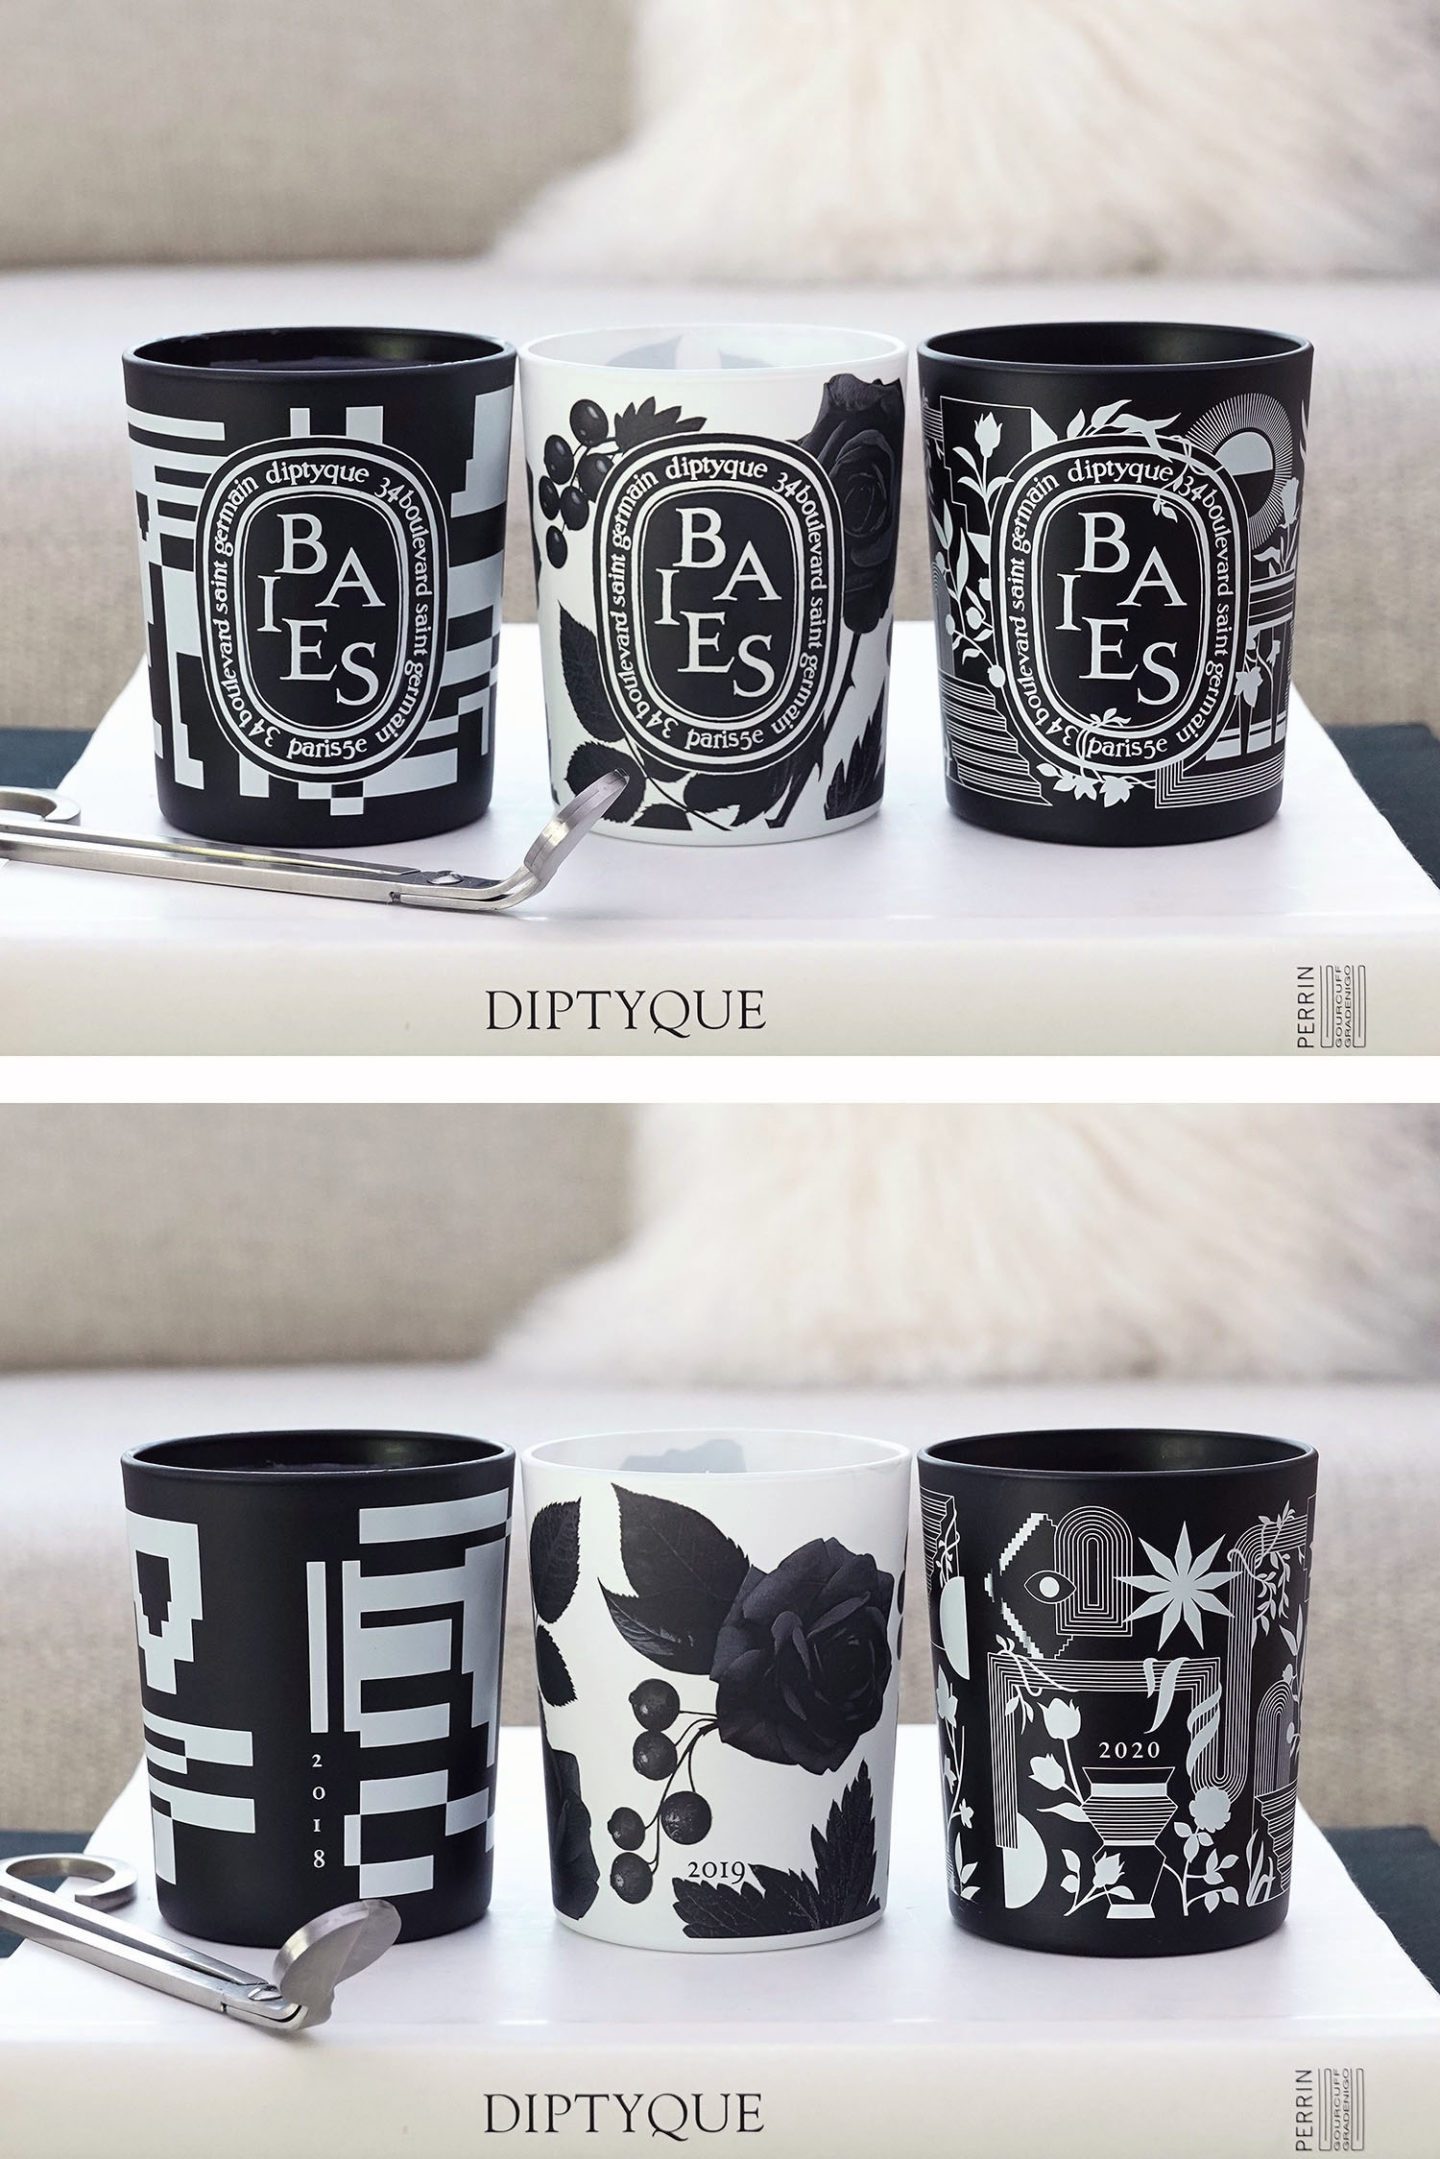 Diptyque Limited-Edition Black Friday Baies Candles